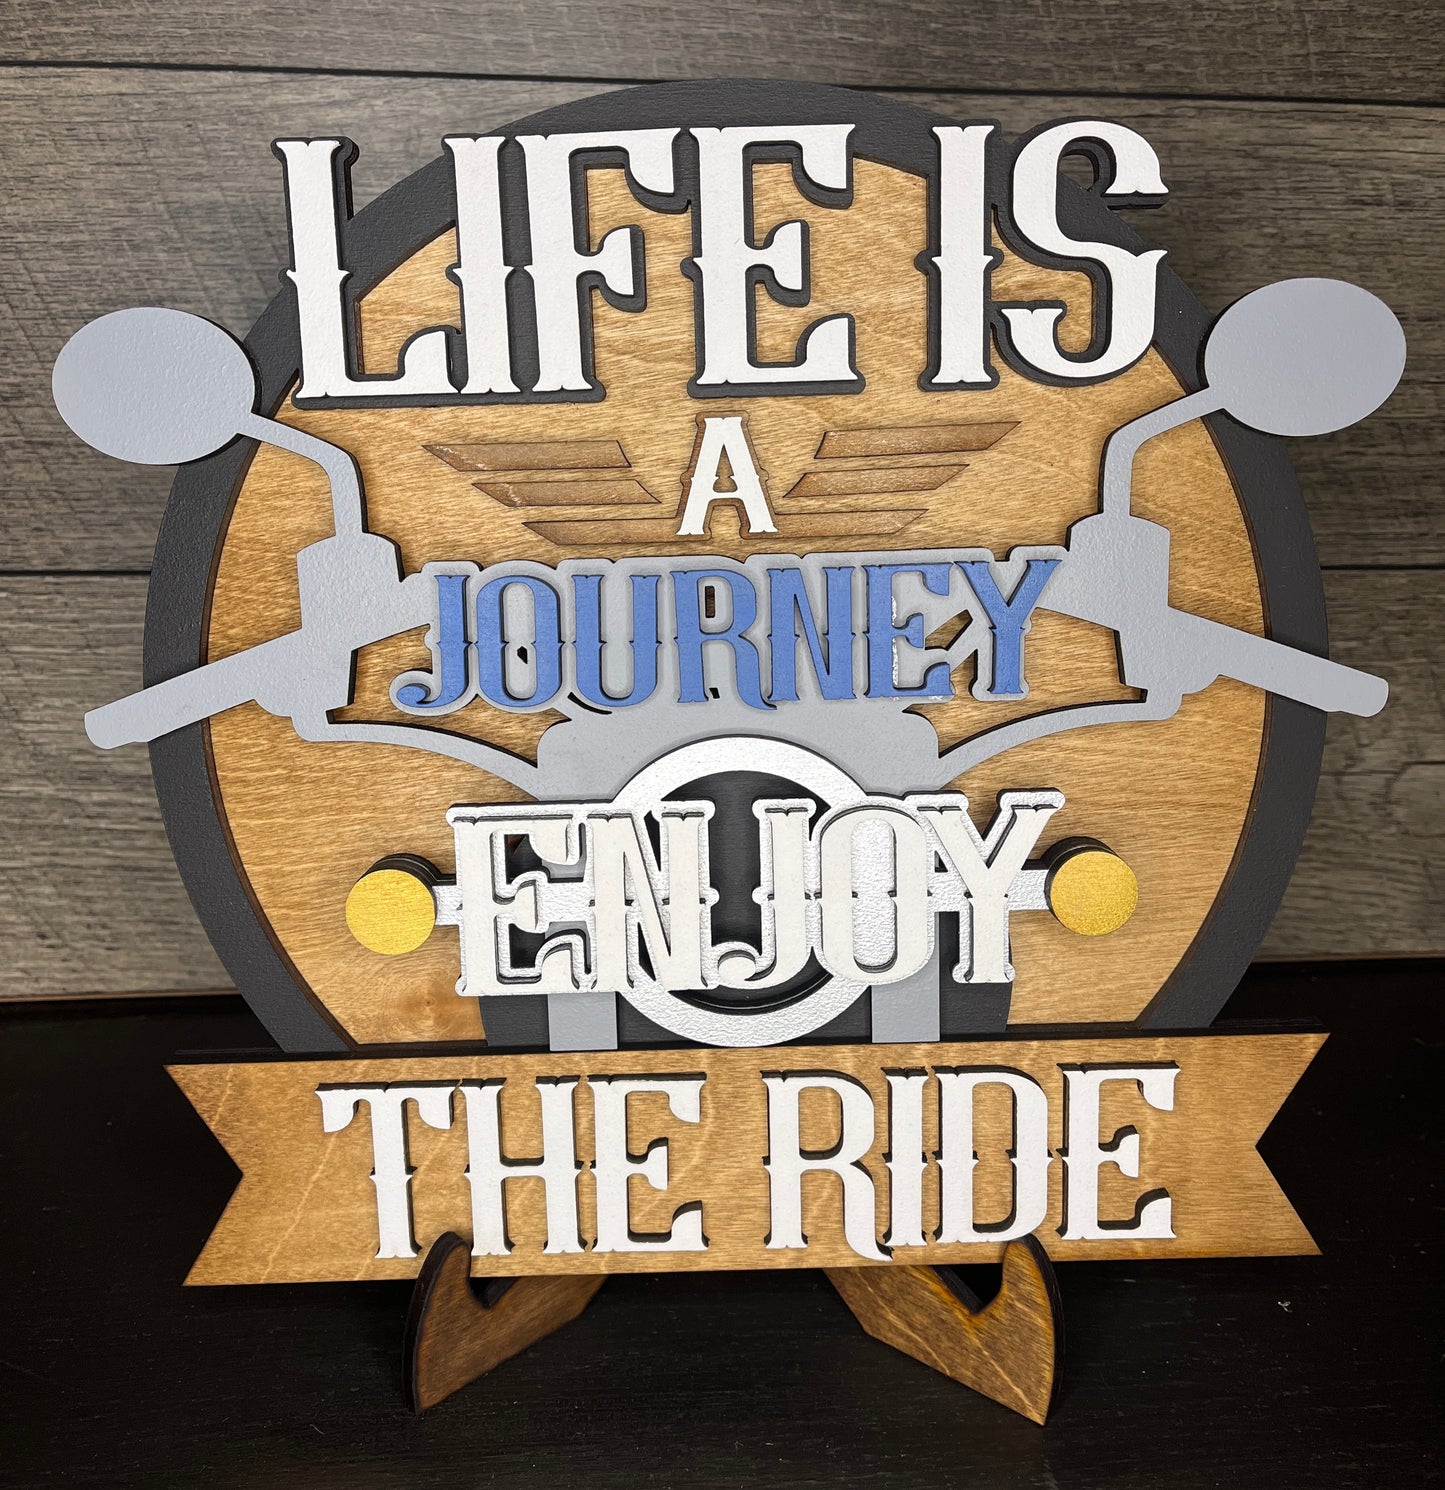 Life is a Journey Motorcycle Round Sign